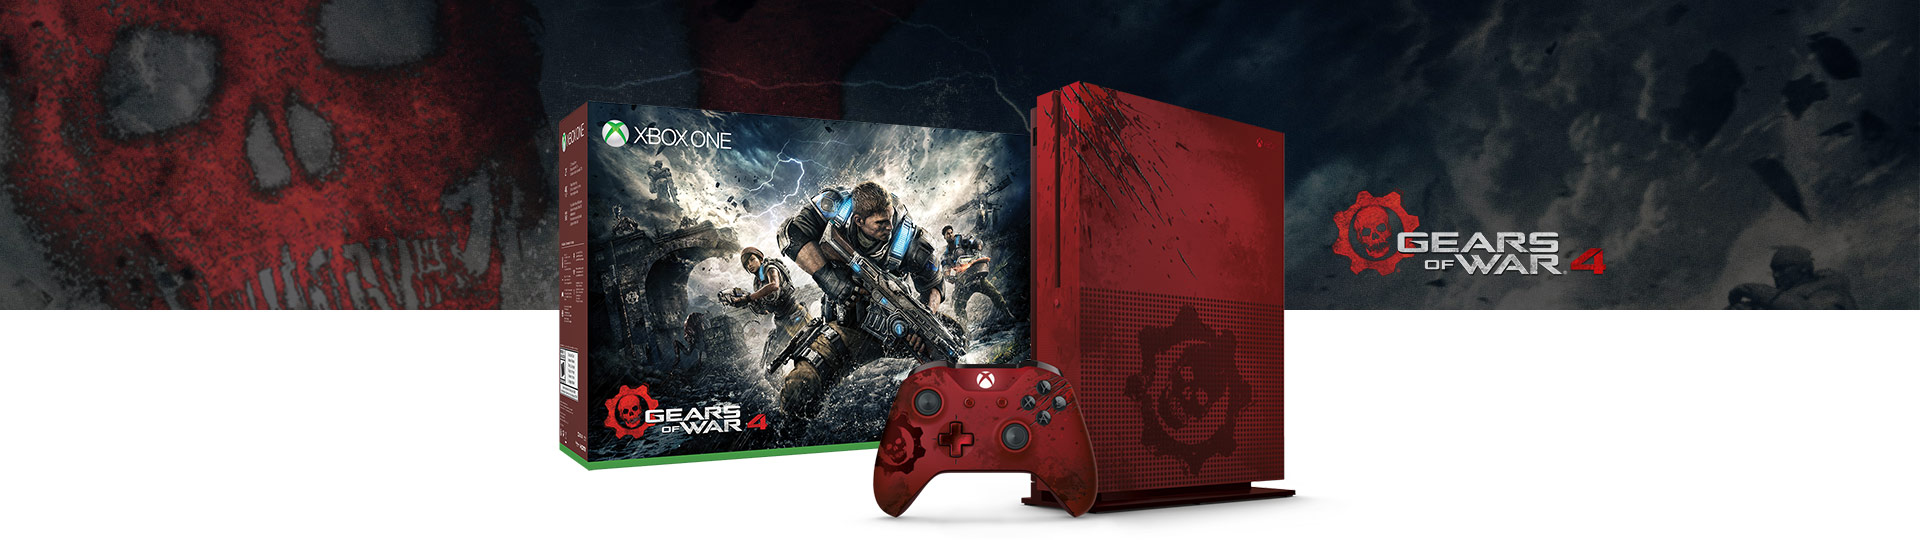 Gears Of War Epic Edition Game